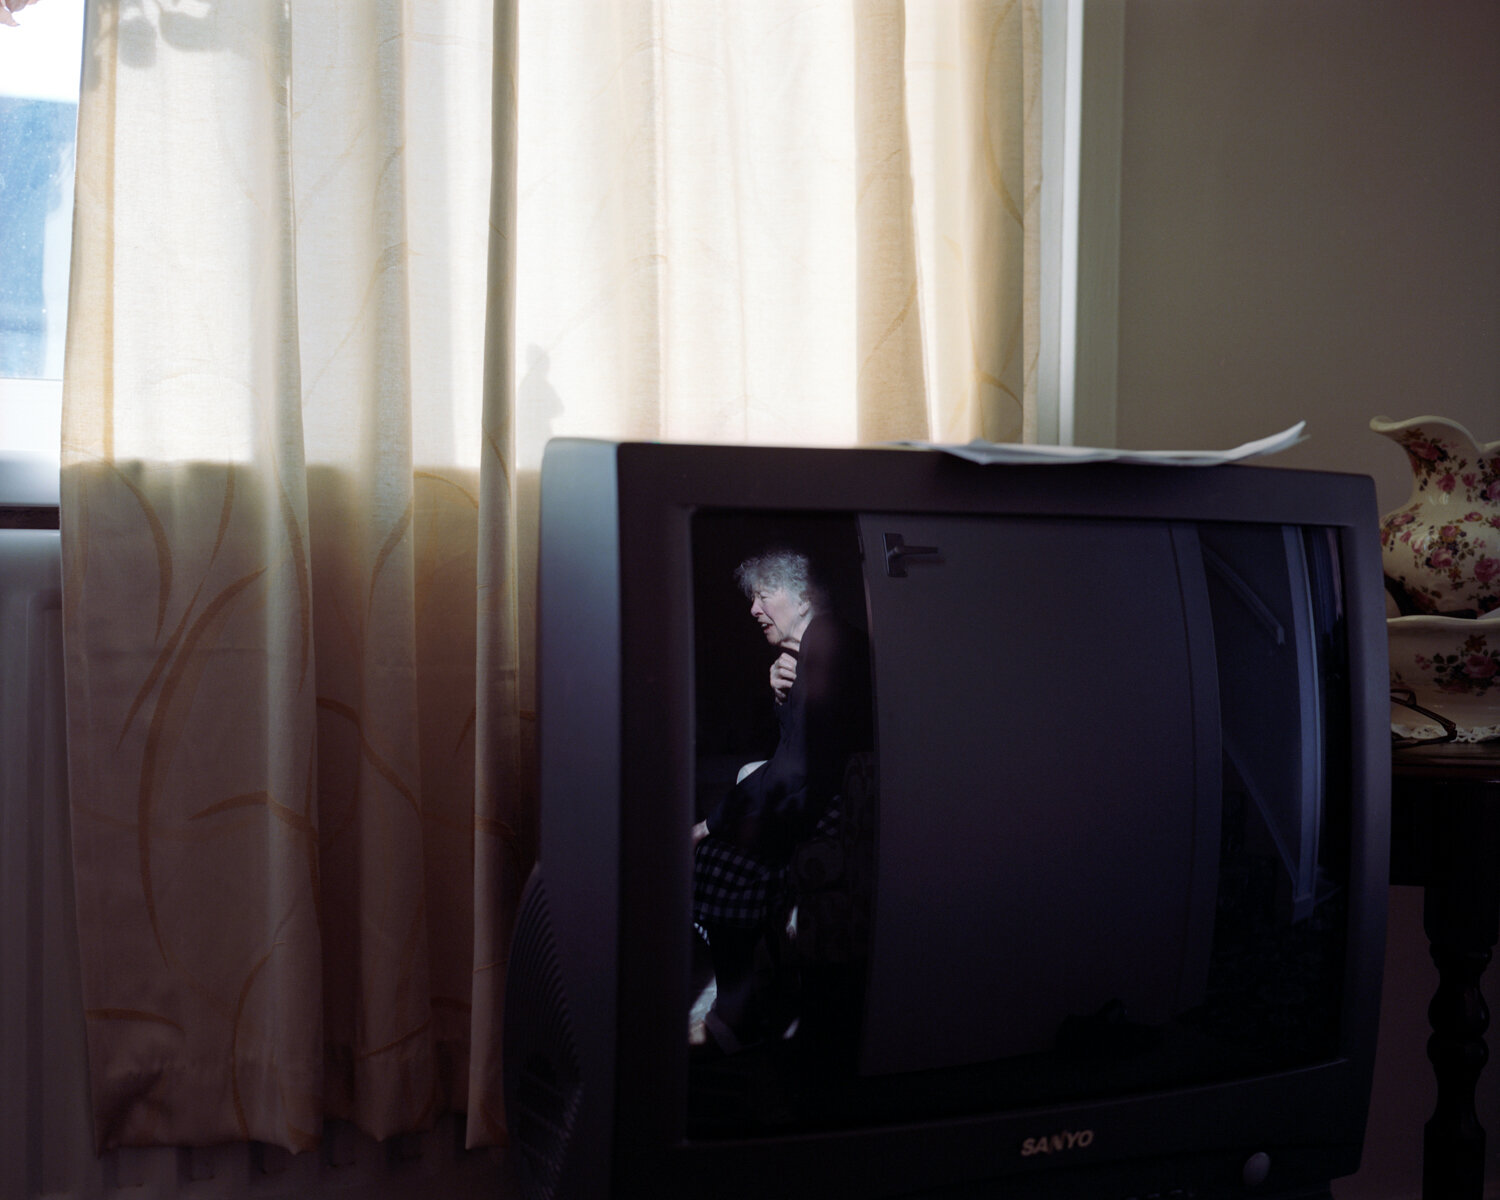 26) Nans Reflection In The Old Tv (2).jpg